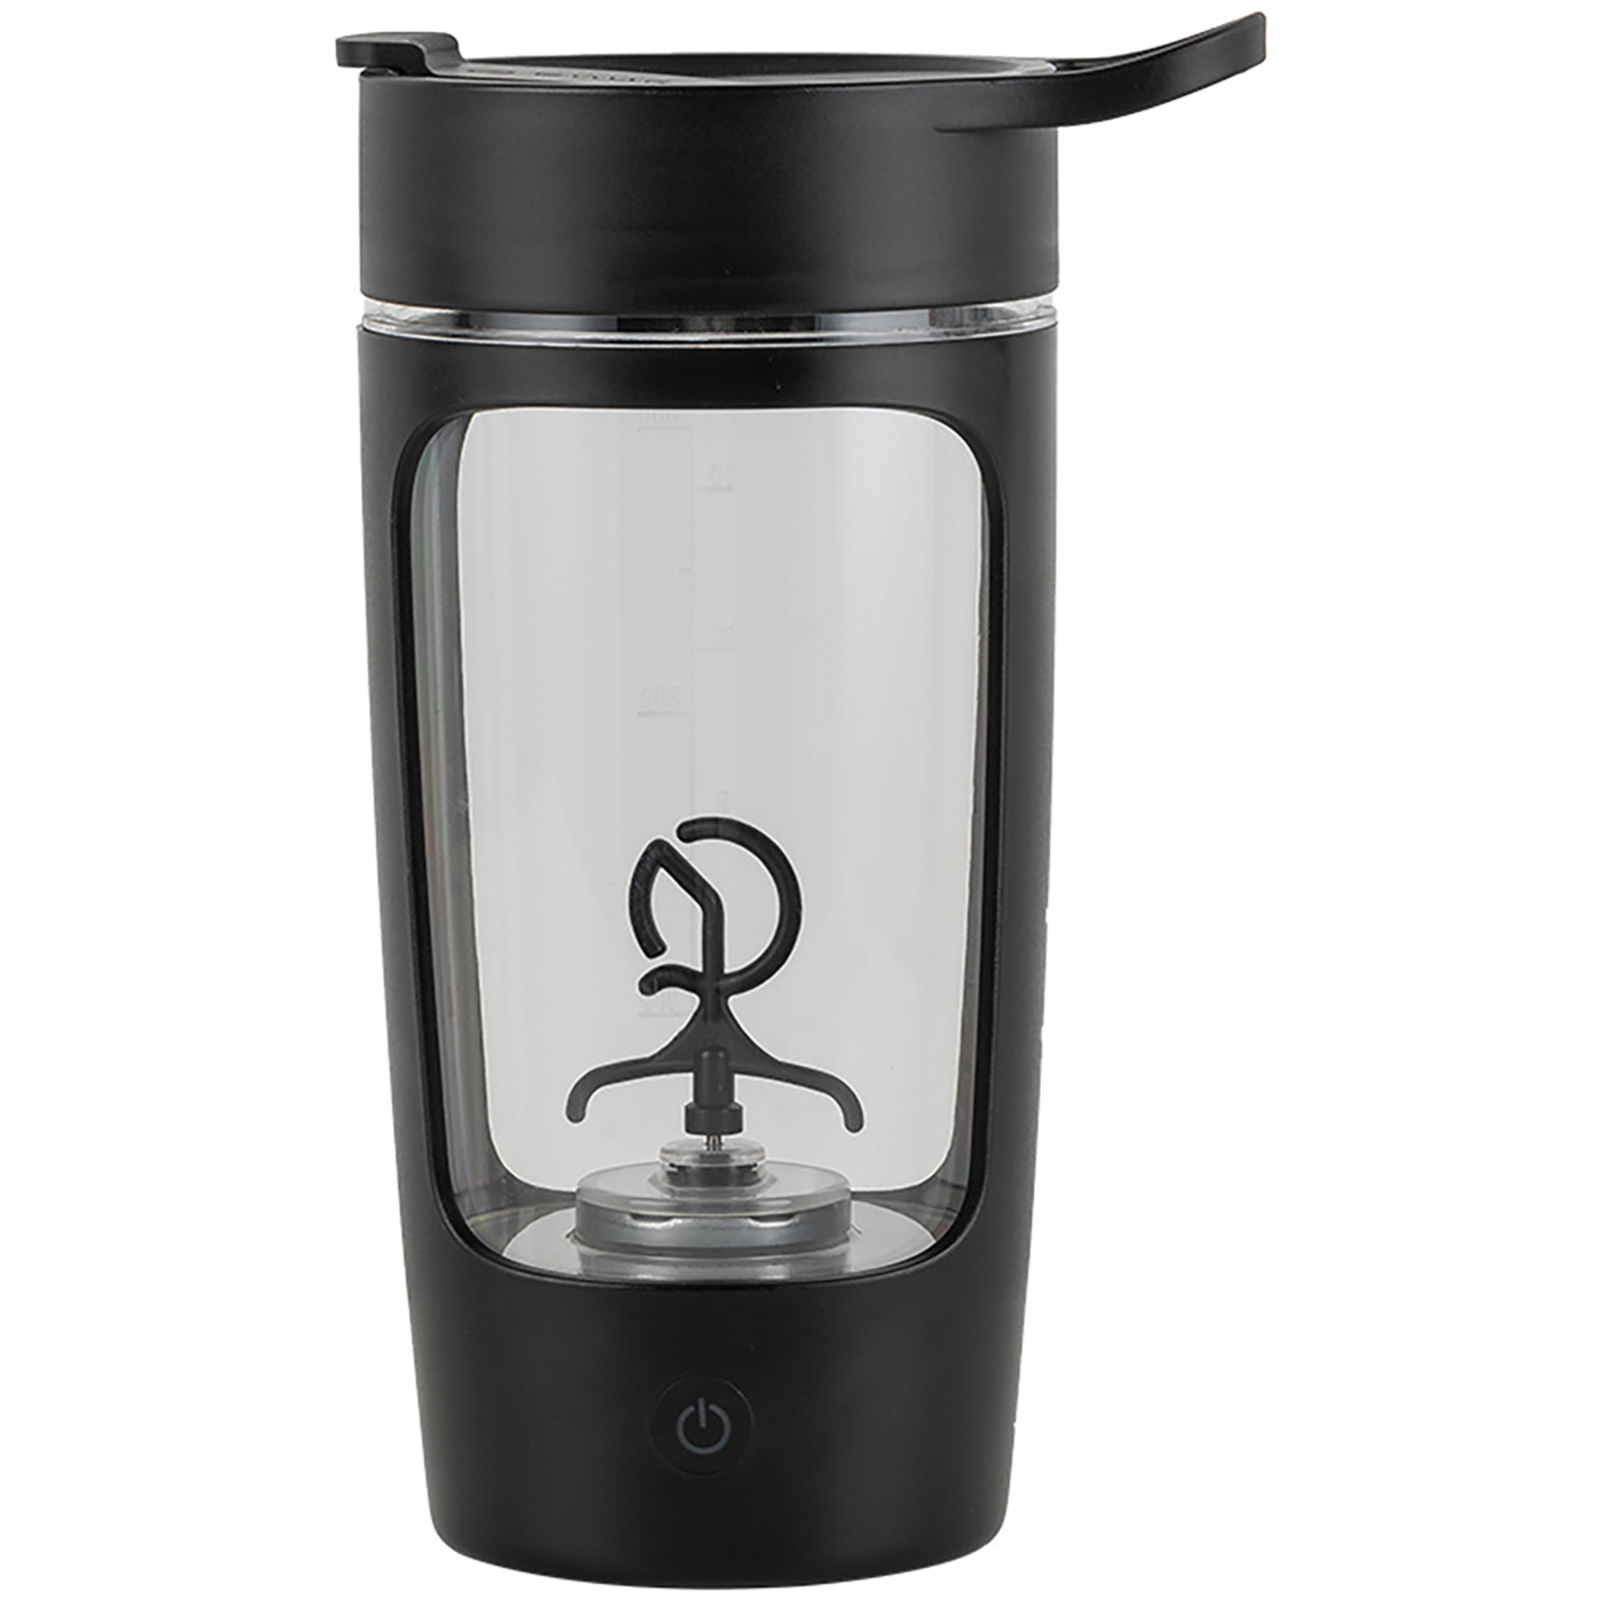 Automatic Mixer Cup 7000rpm Strong Power 650ml Large-Capacity Leakproof Electric Shaker Bottles Black